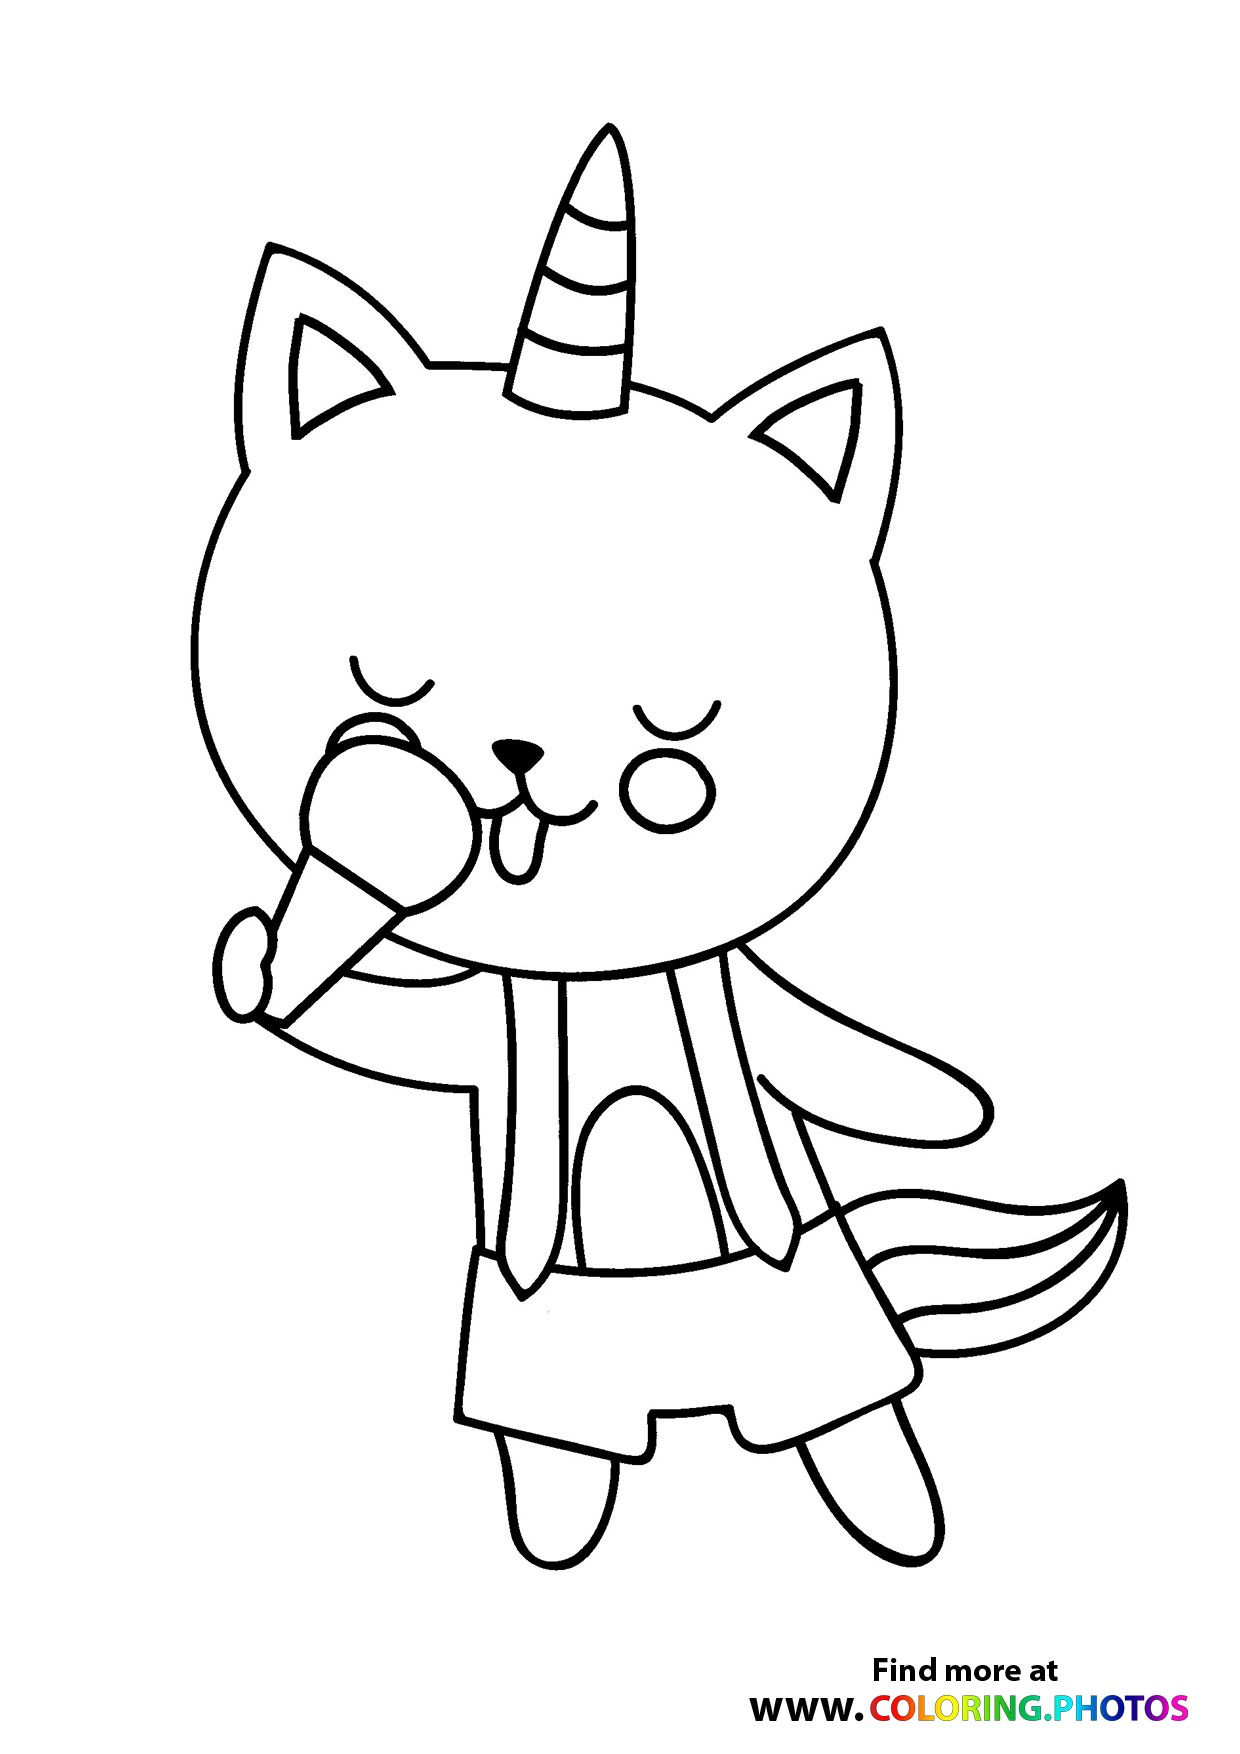 Cat eating ice-cream - Coloring Pages for kids